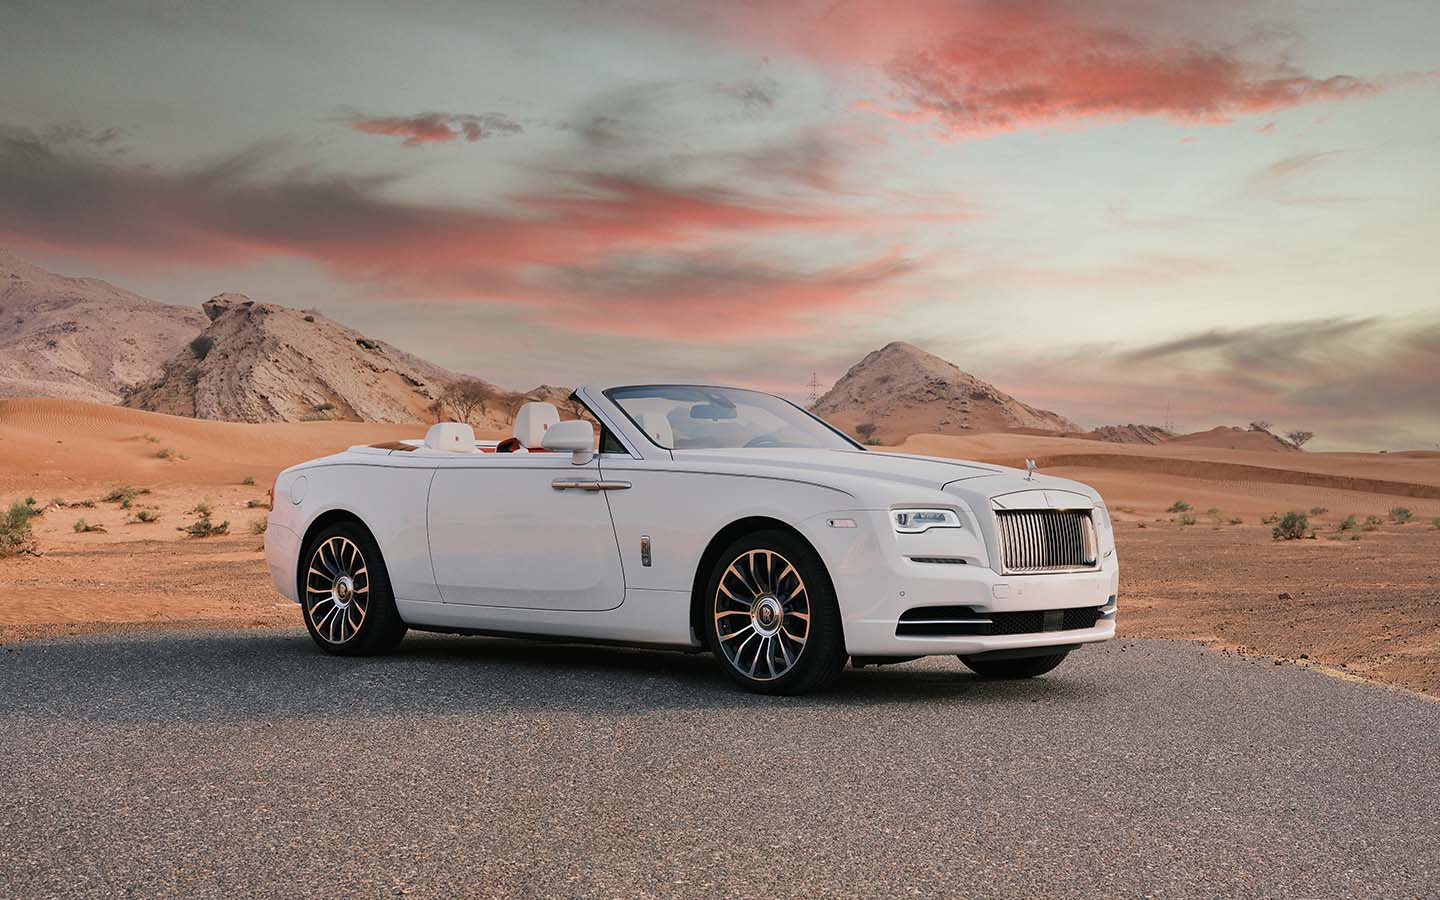 the Dawn is a cabriolet by the luxury brand